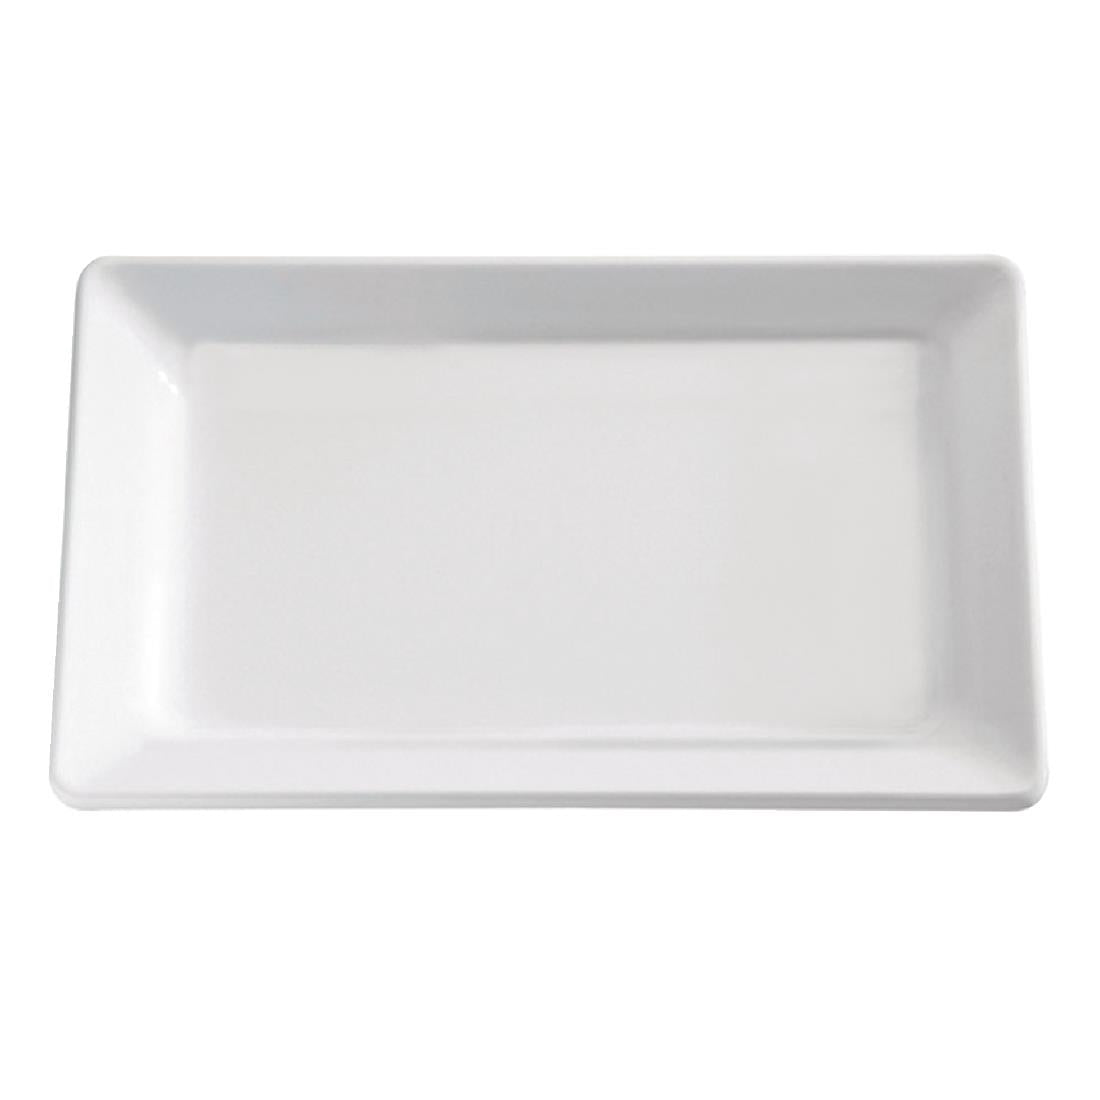 GF122 APS Pure Melamine Tray White GN 1/2 JD Catering Equipment Solutions Ltd